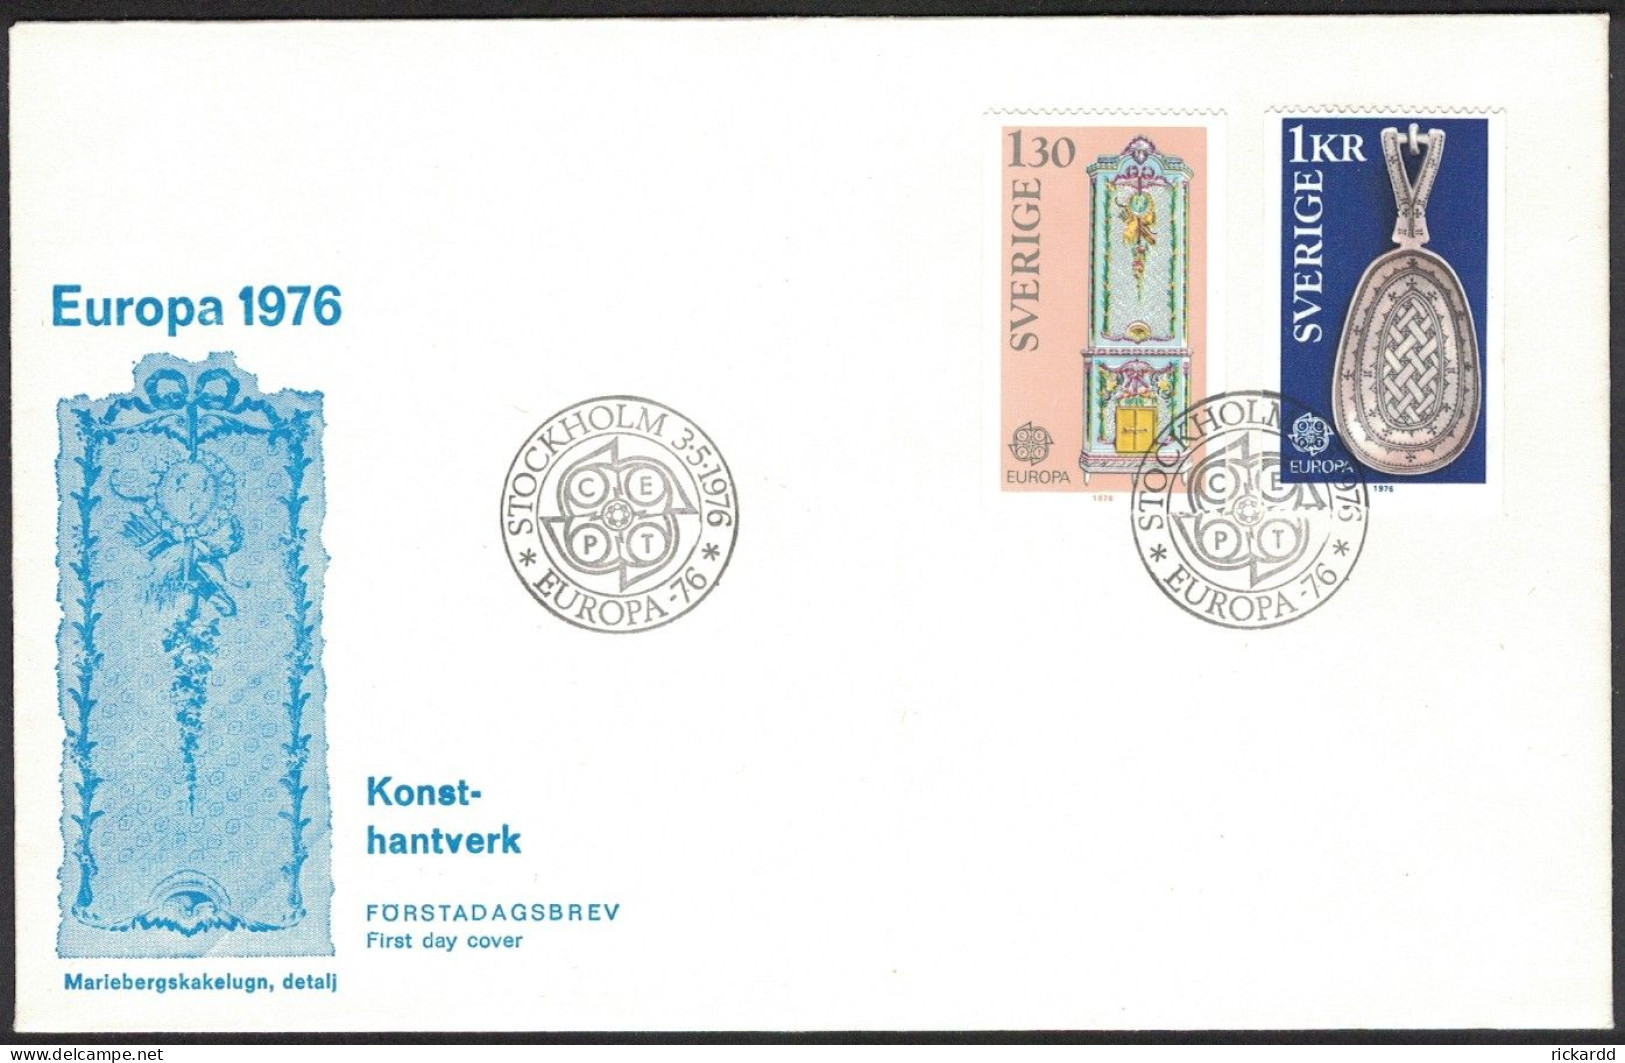 Sweden - FDC 3/5 1976 Europa 1976 *ILLUSTRATED* - FDC